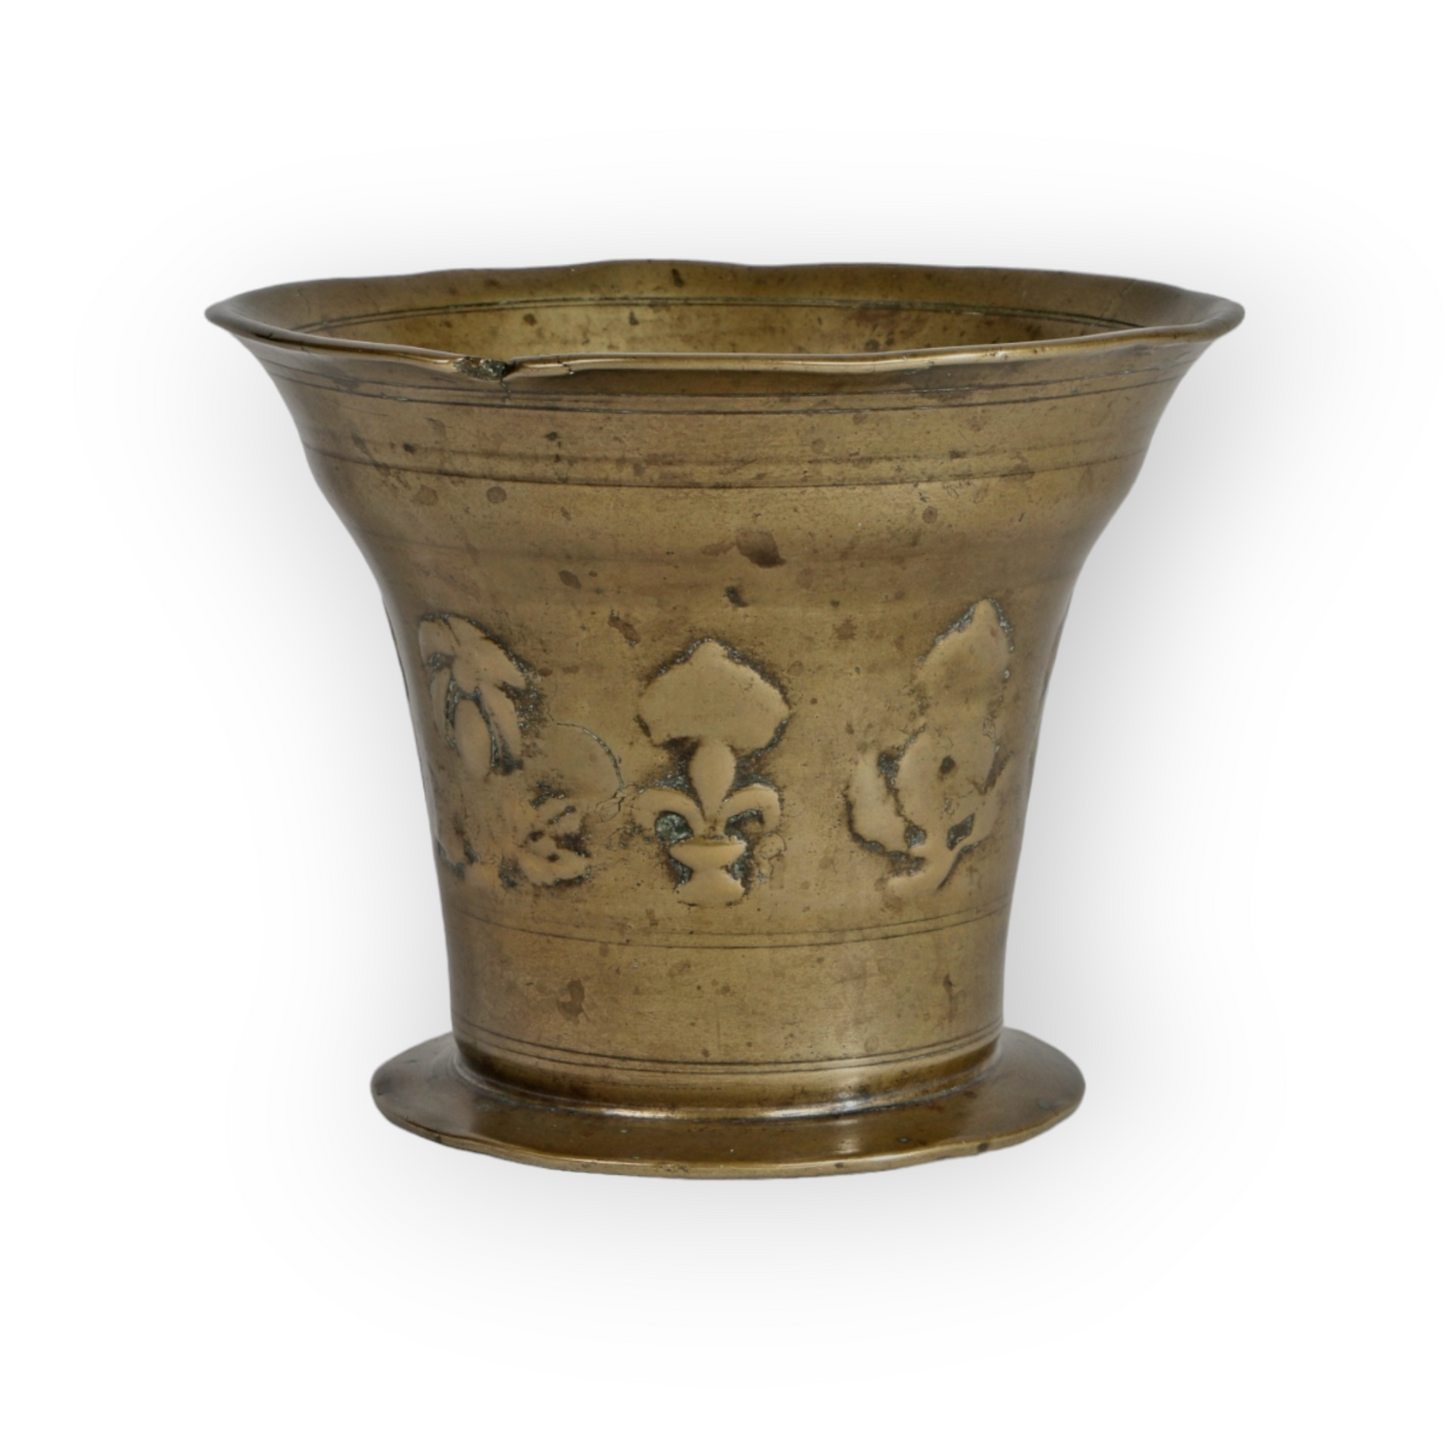 A Diminutive 17th Century Charles I Period, English Antique Bronze-Alloy Mortar, Attributed To The ‘X’ Foundry, Suffolk, England, circa 1680.